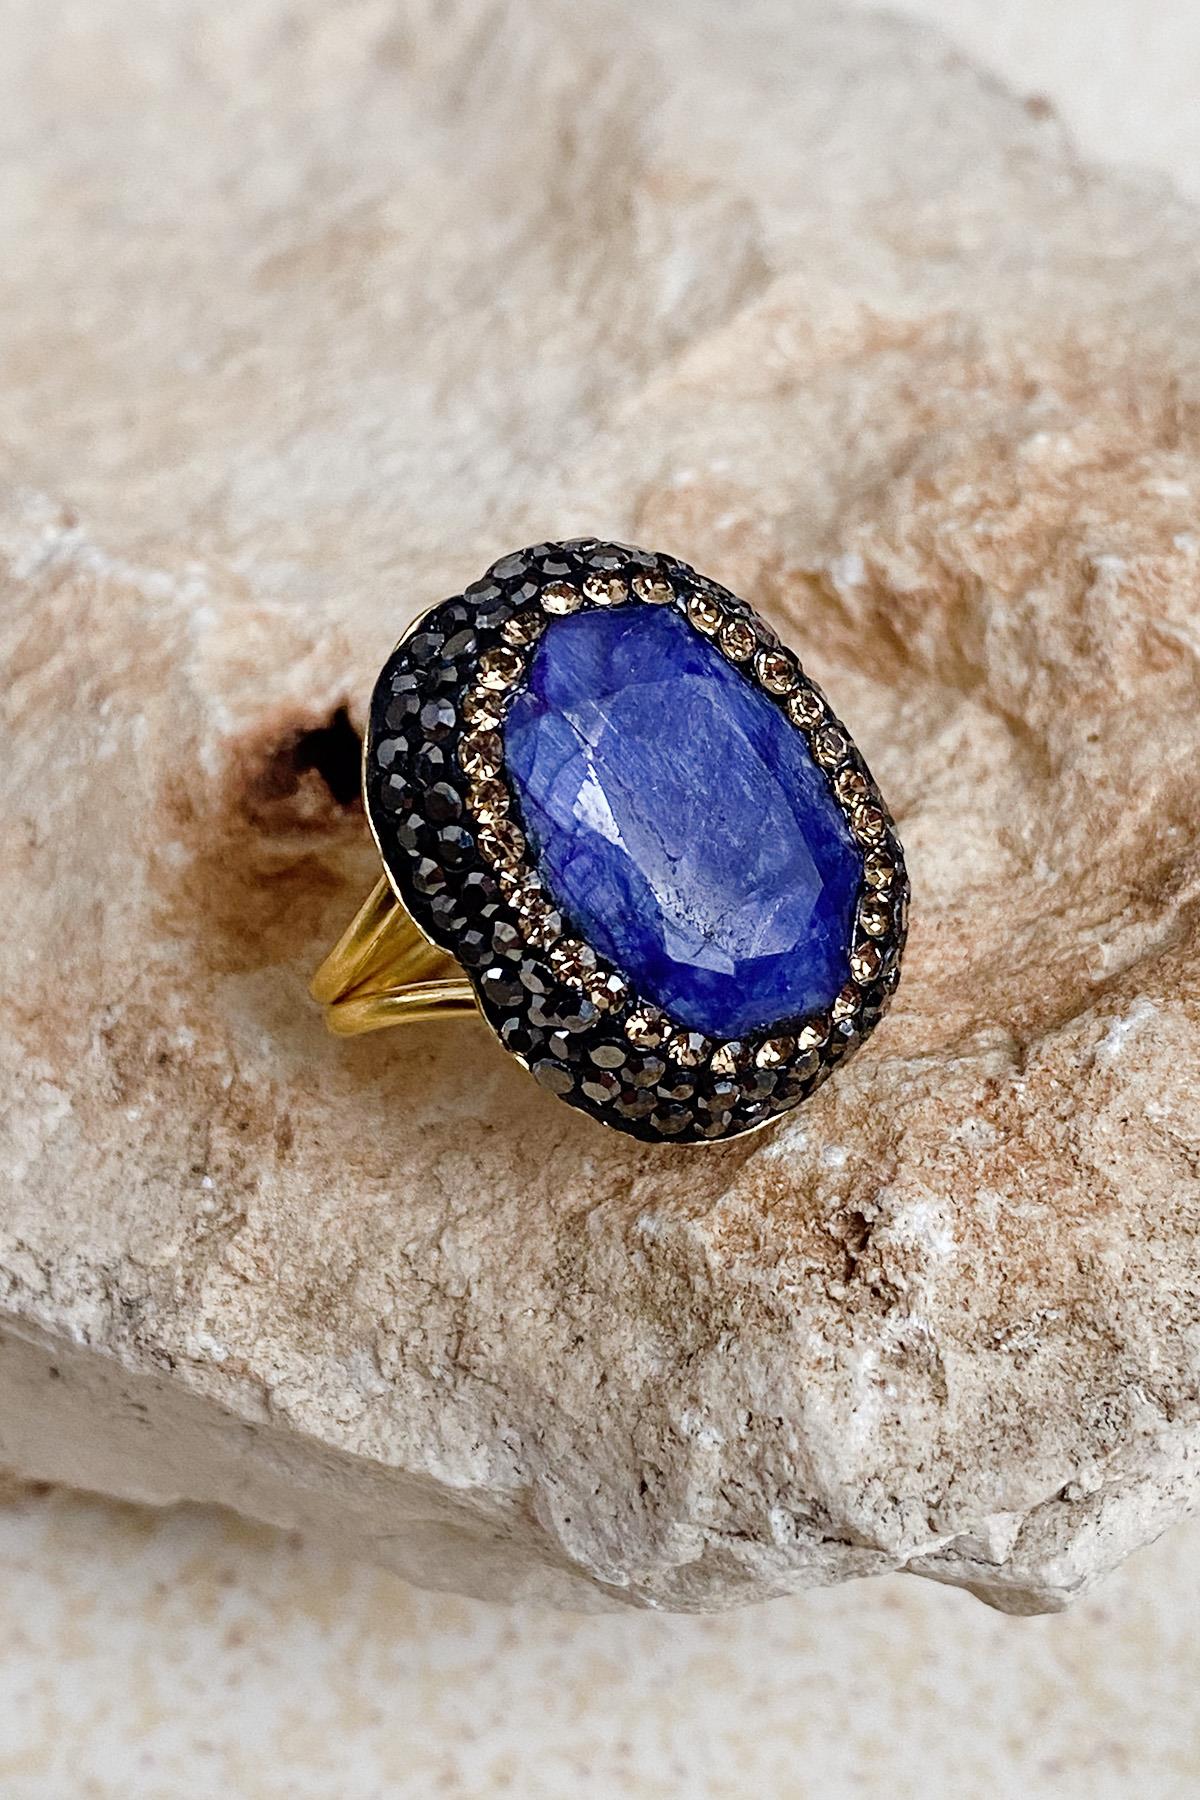 Akasya Series Blue Sapphire Natural Stone Handcrafted Women's Ring Adjustable Size